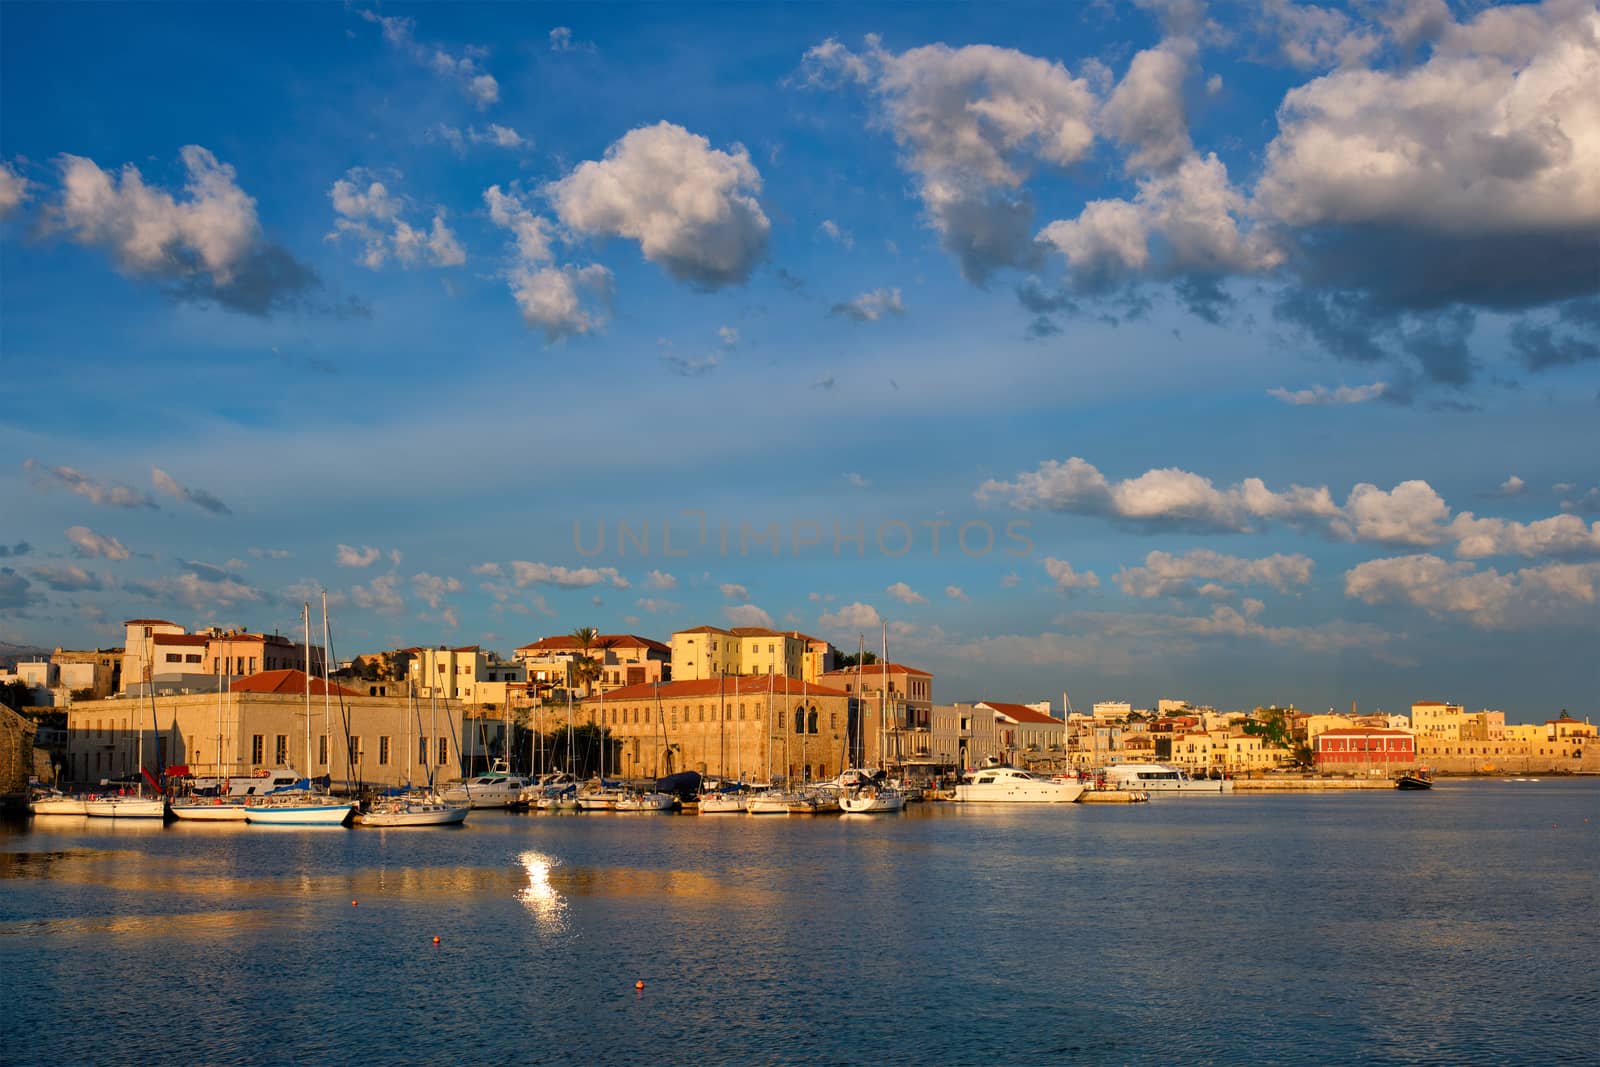 Yachts and boats in picturesque old port of Chania, Crete island. Greece by dimol